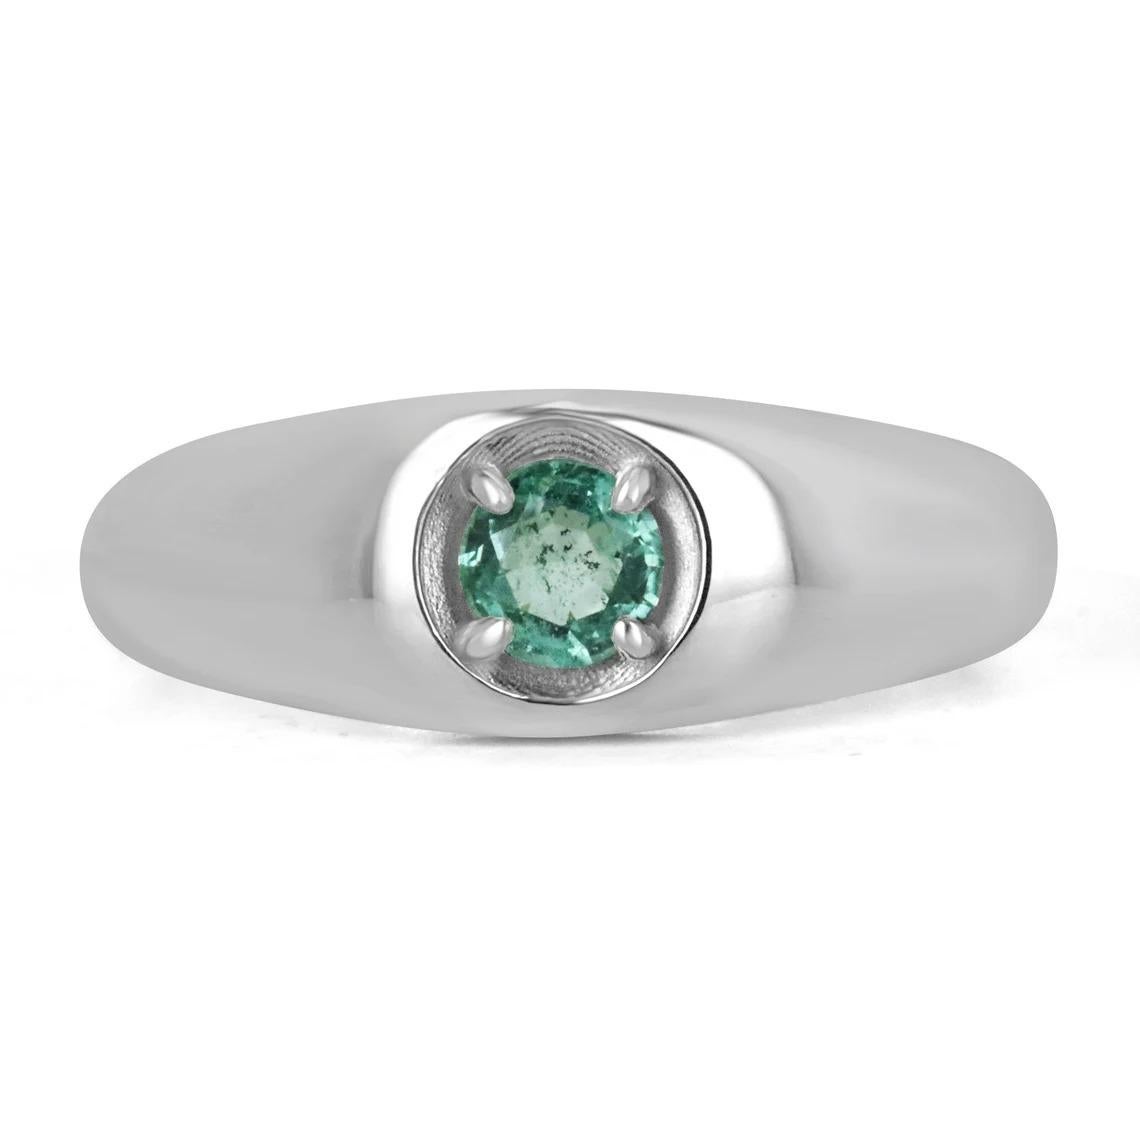 A lovely solitaire emerald ring; featuring a petite under half a carat round cut emerald from the origin of Zambia. The gemstone showcases a gorgeous medium green color with excellent clarity and luster. Set in a secure four-prong setting, crafted